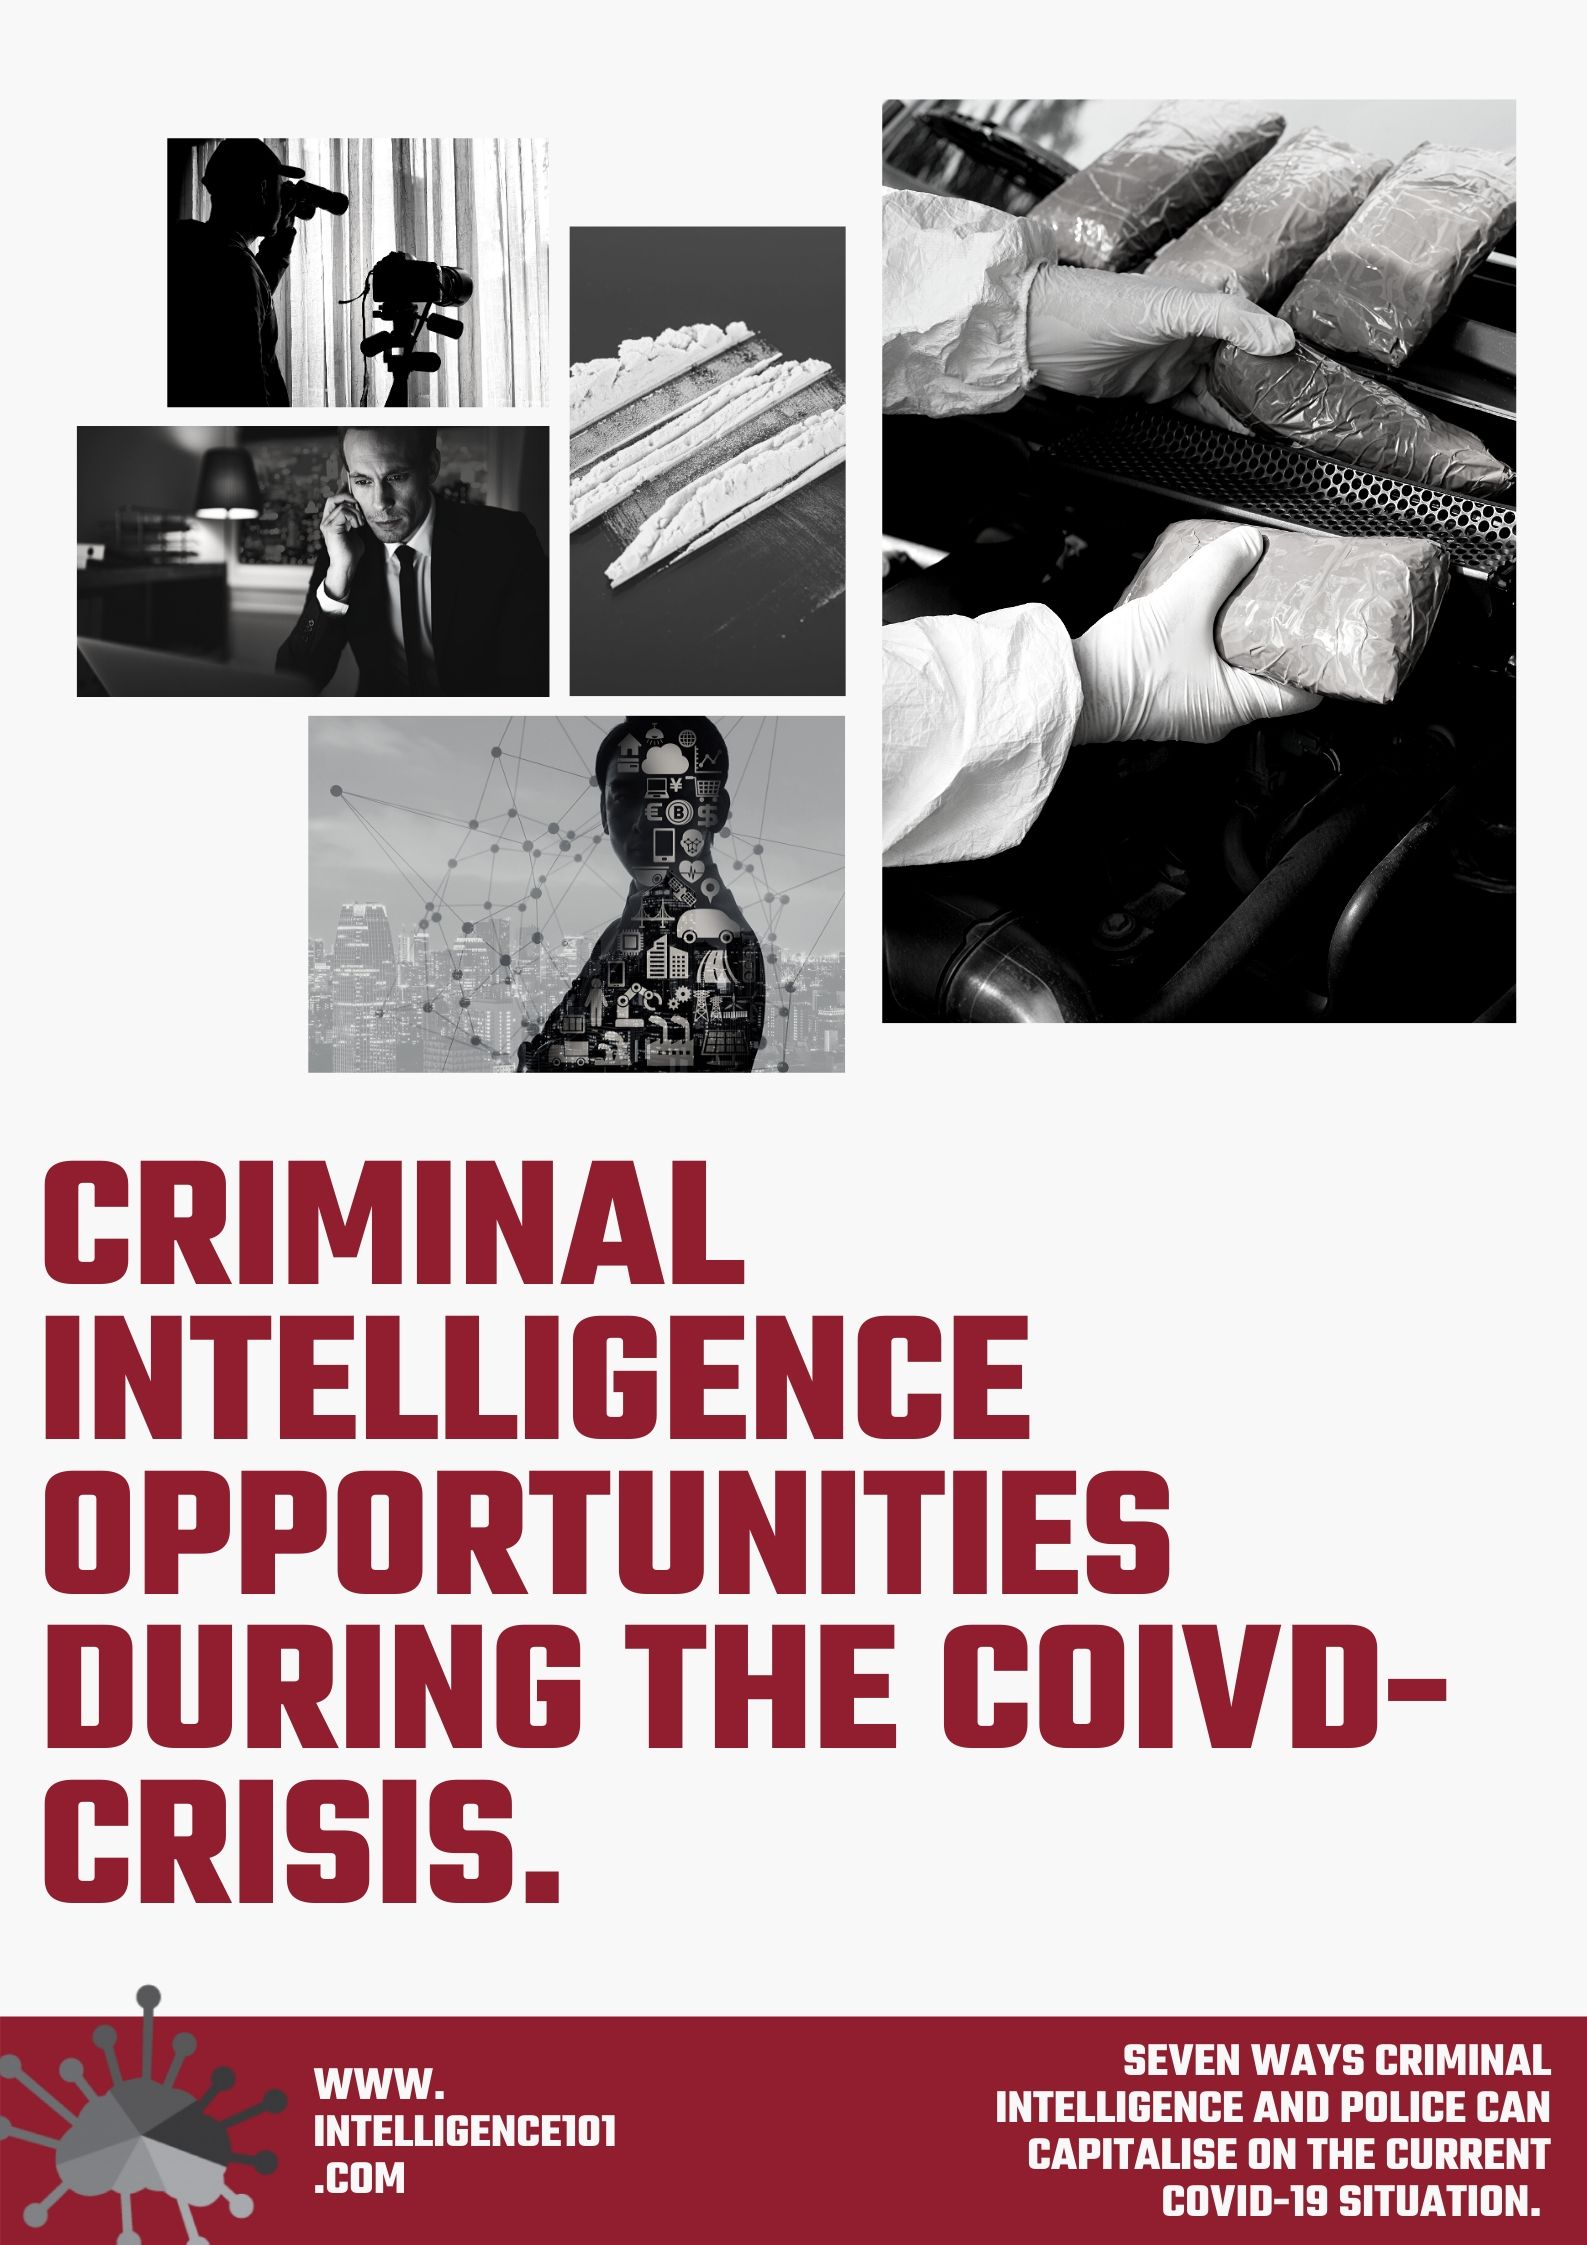 Criminal Intelligence Opportunities During the COIVD- Crisis.